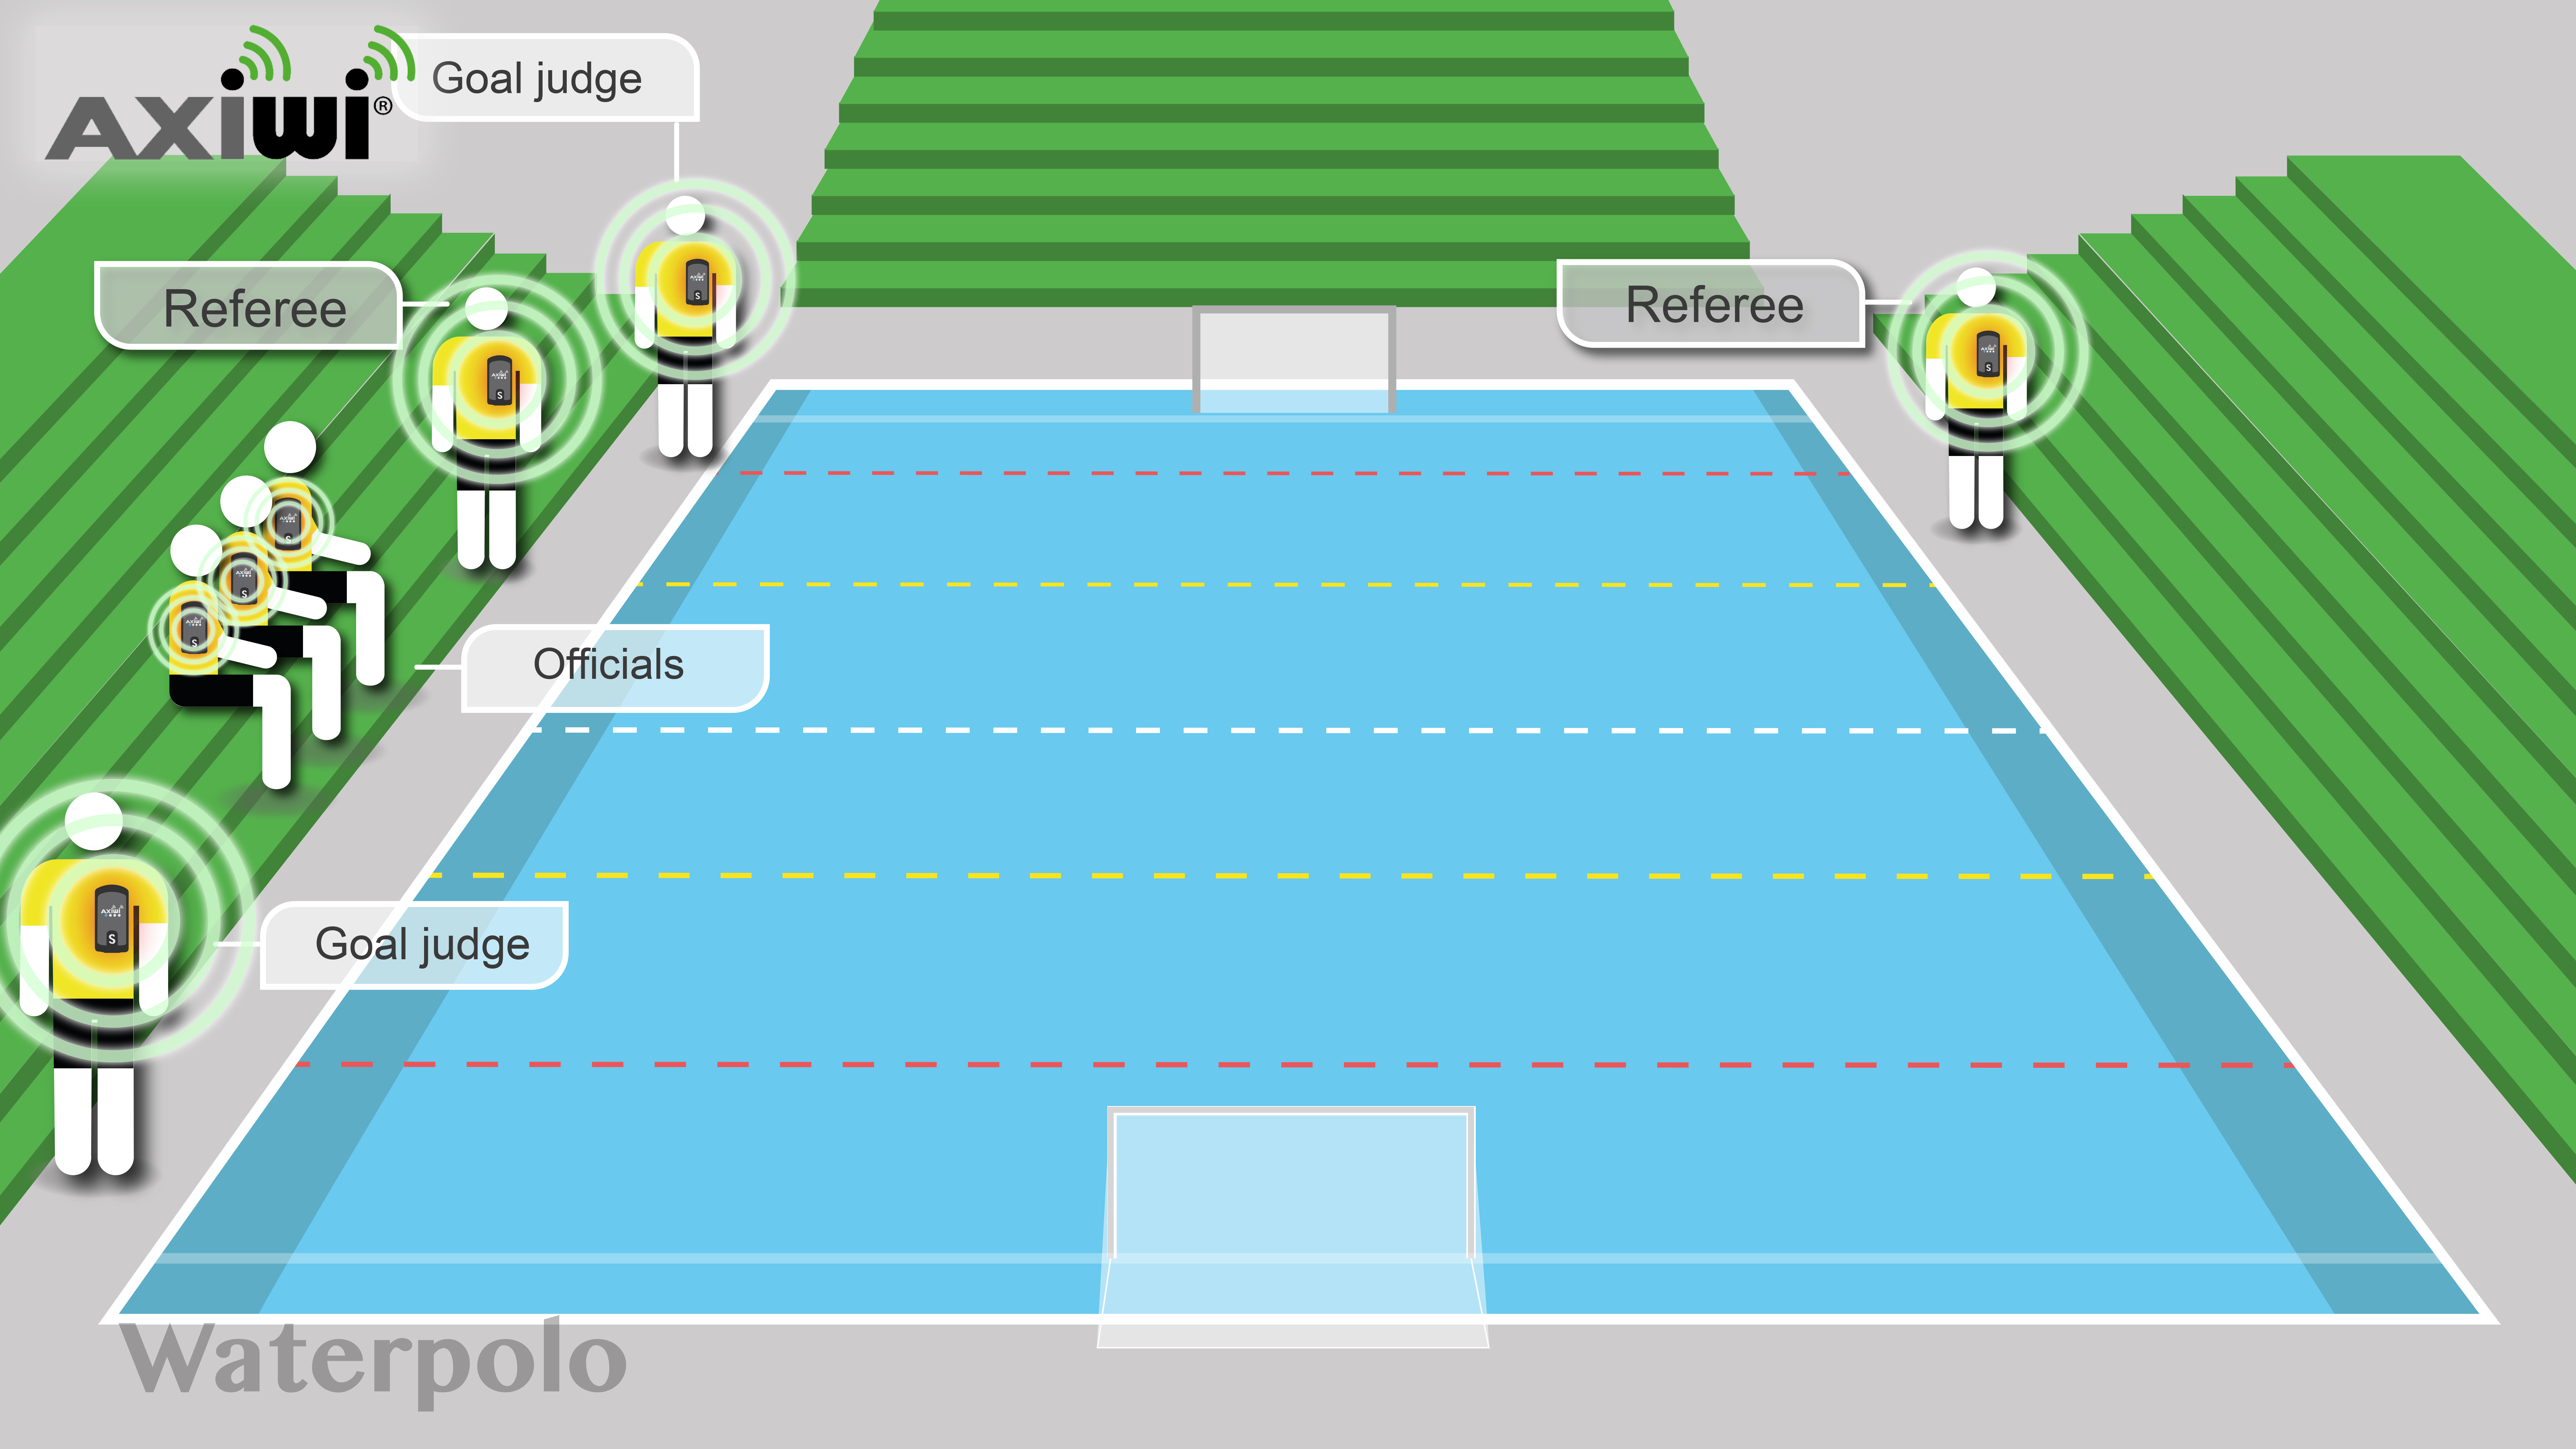 axiwi-wireless-referee-communication-system-water-polo